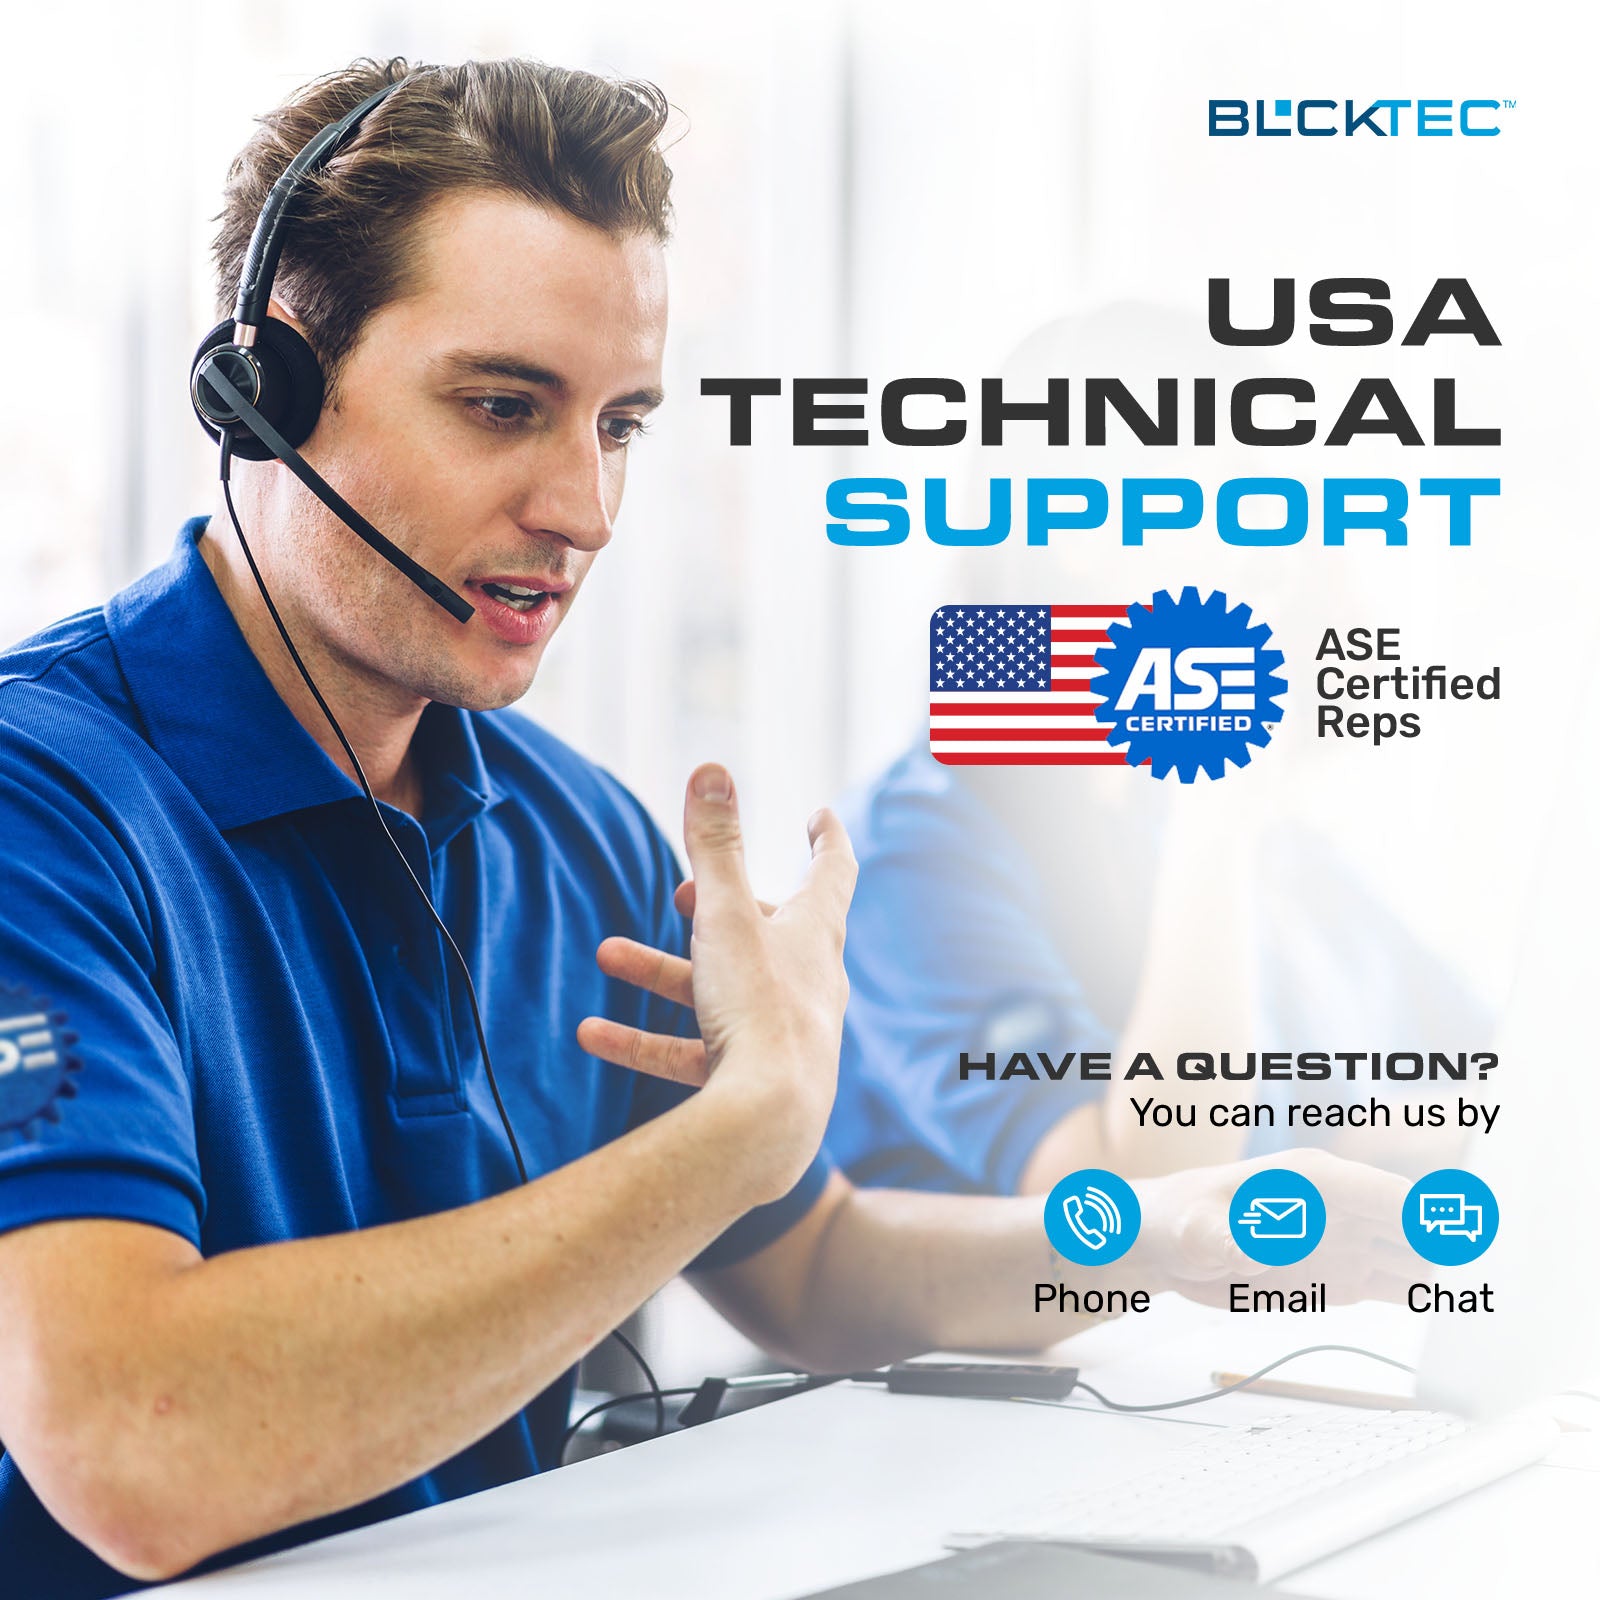 BLCKTEC offers free technical support that is based in the US. ASE certified reps standing by to help you with your car issues.